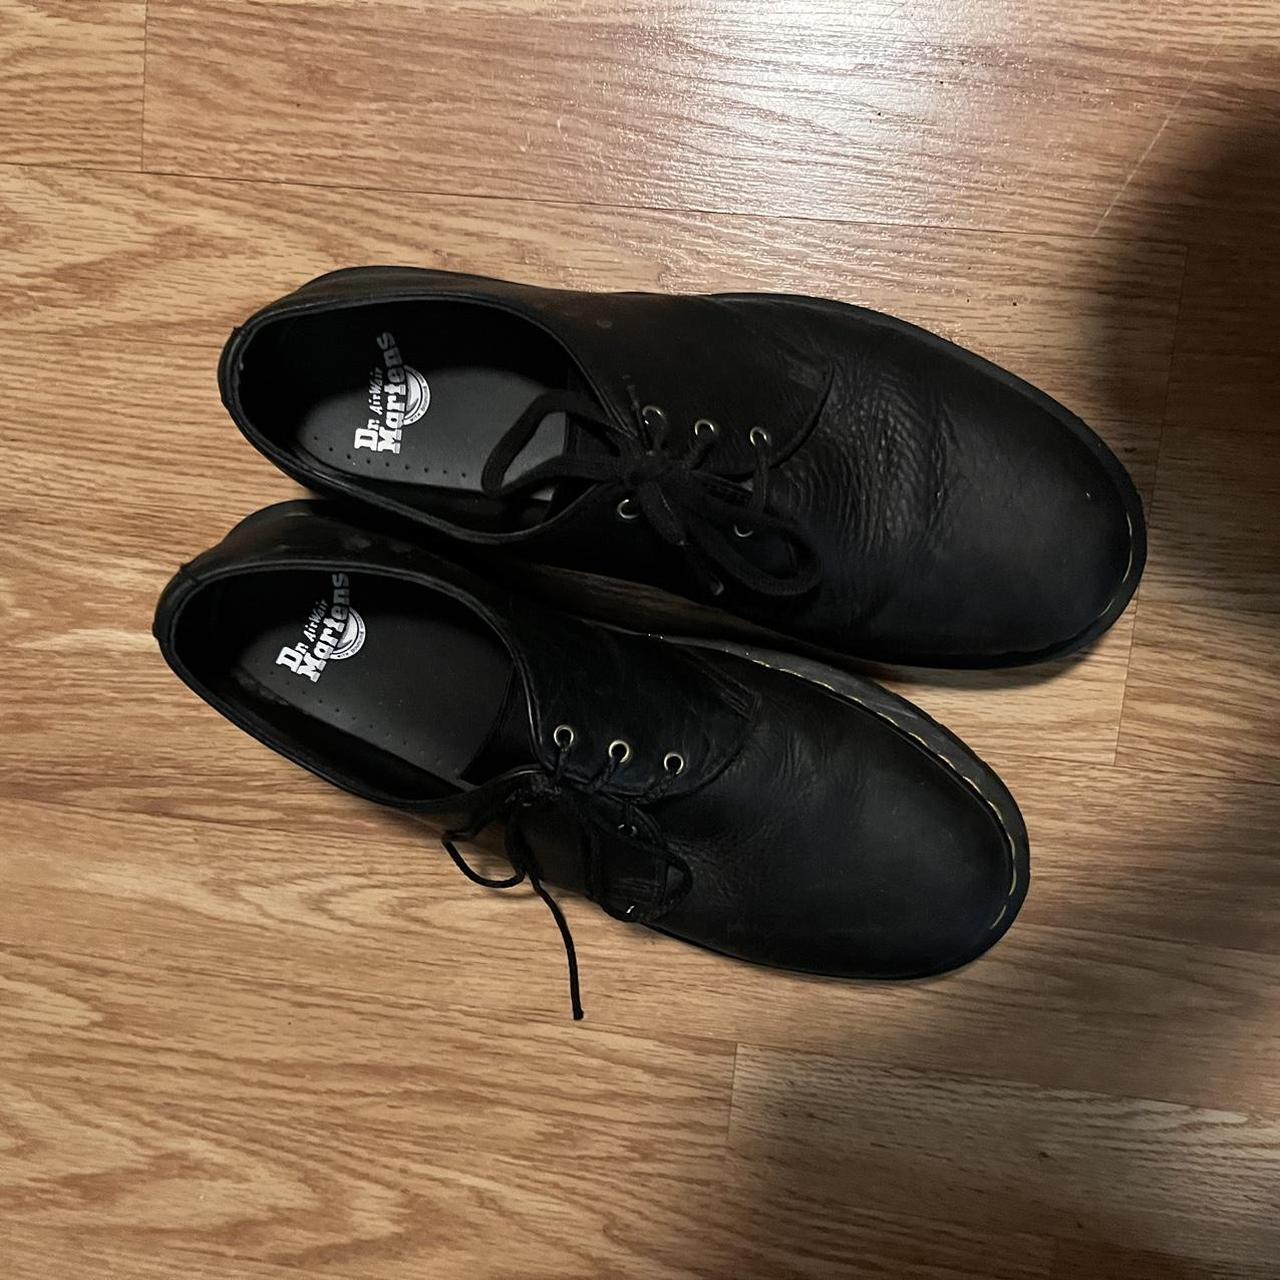 Dr. Martens Men's Black and Yellow Footwear (3)